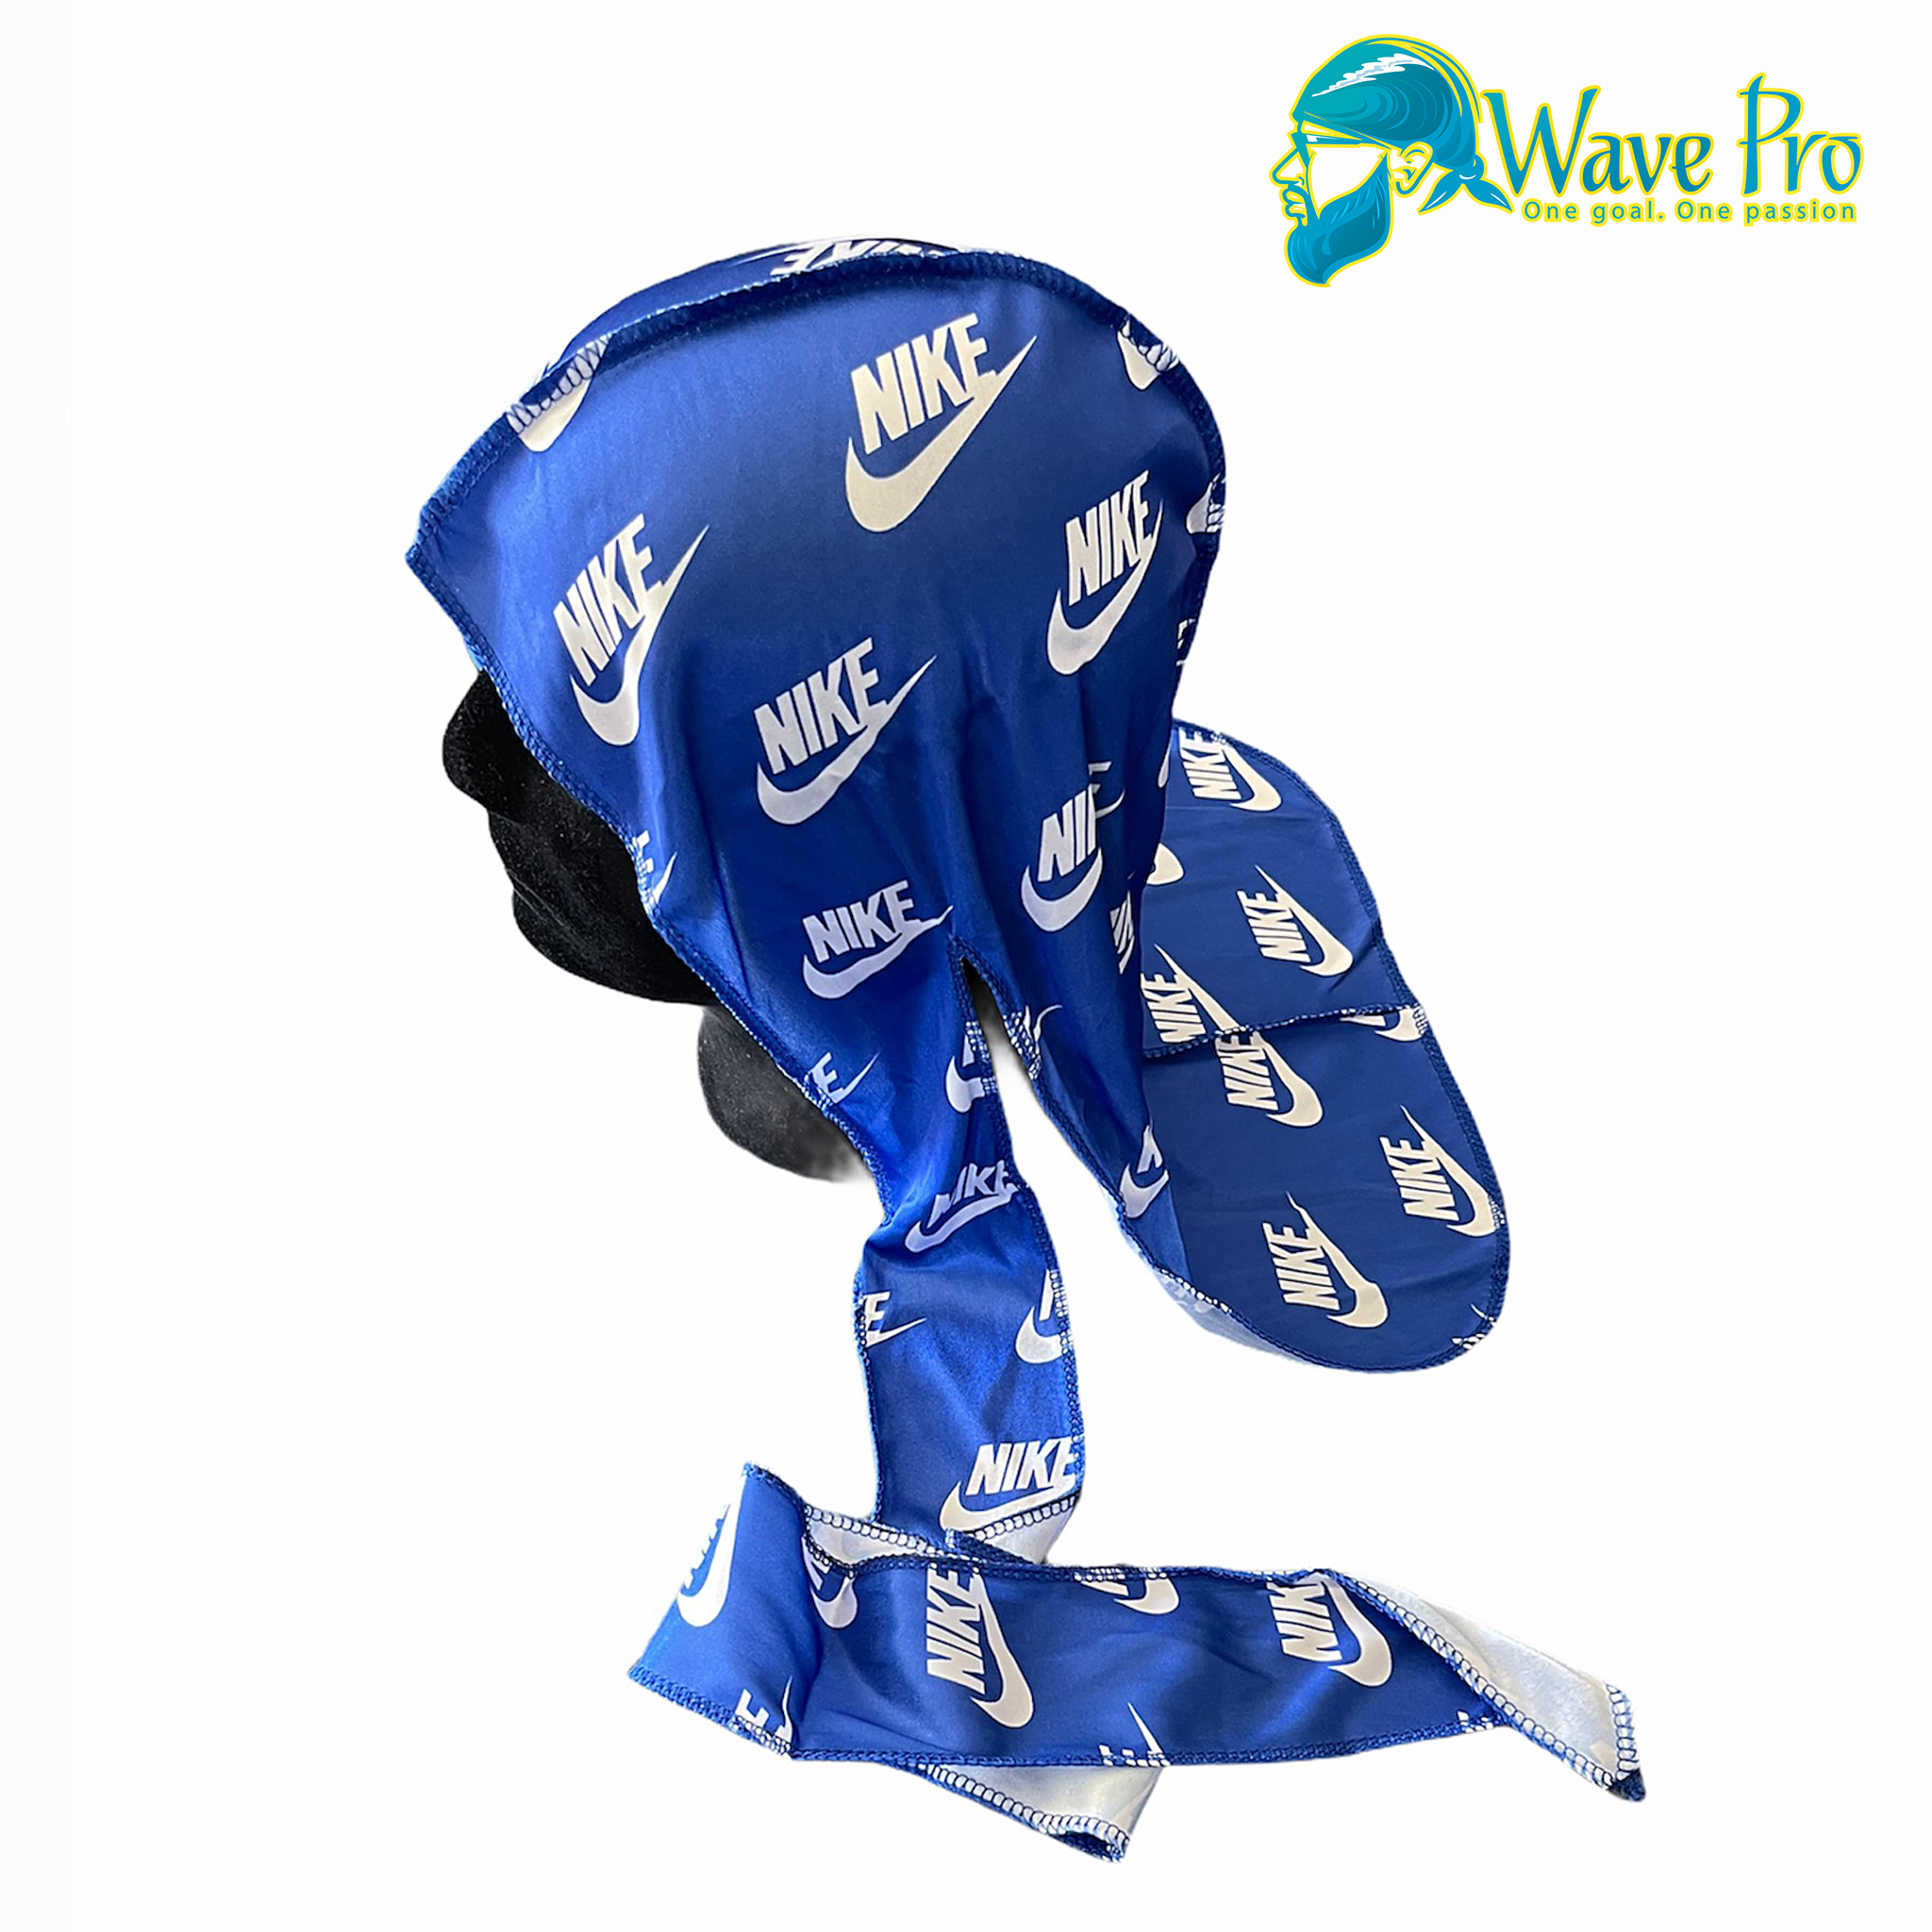 Wave Pro Durags, Silky Green LV Supreme Durag